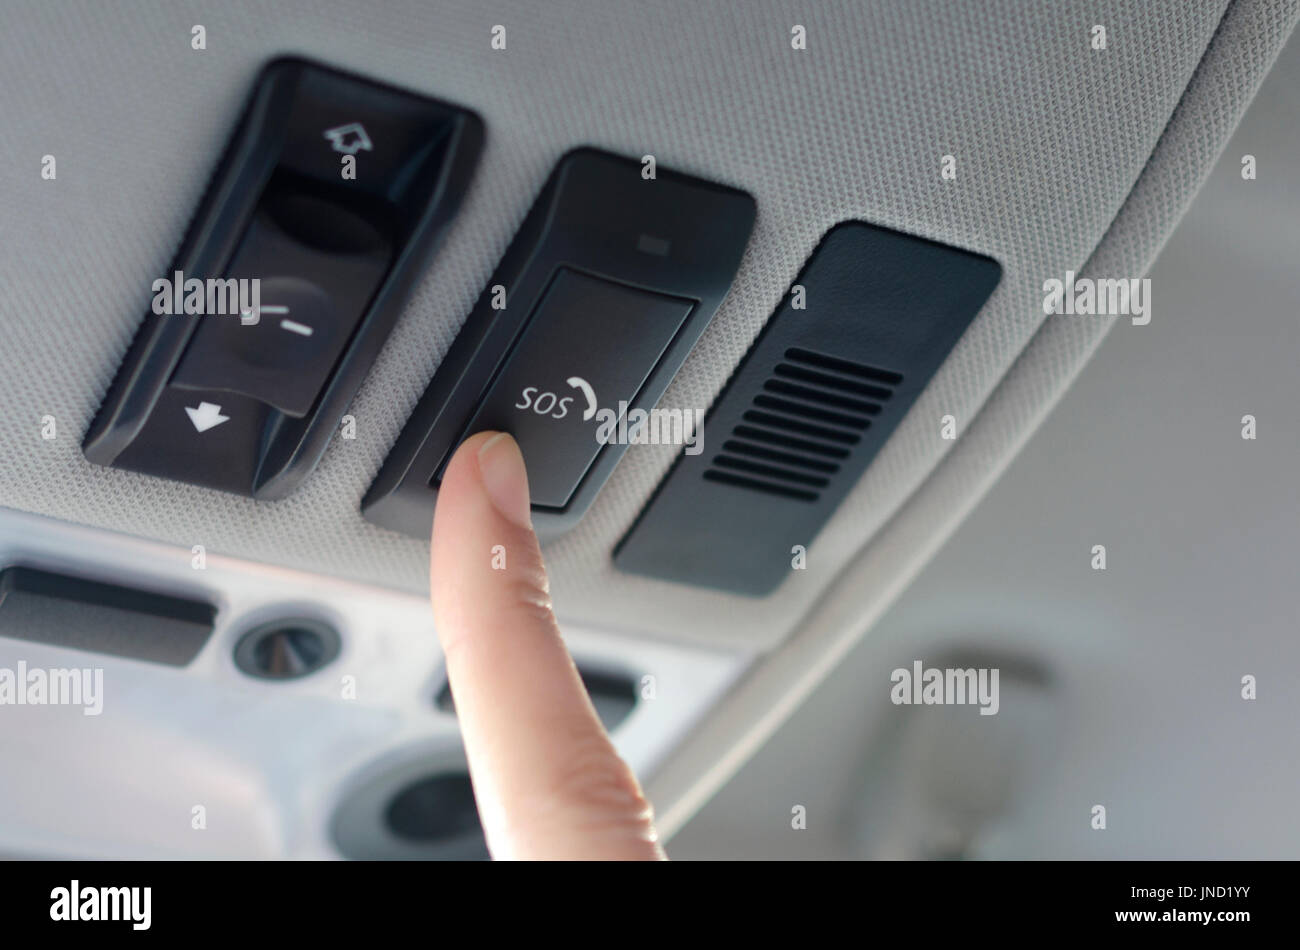 Man's finger pressing emergency sos button to contact with call center to ask for help after car accident Stock Photo